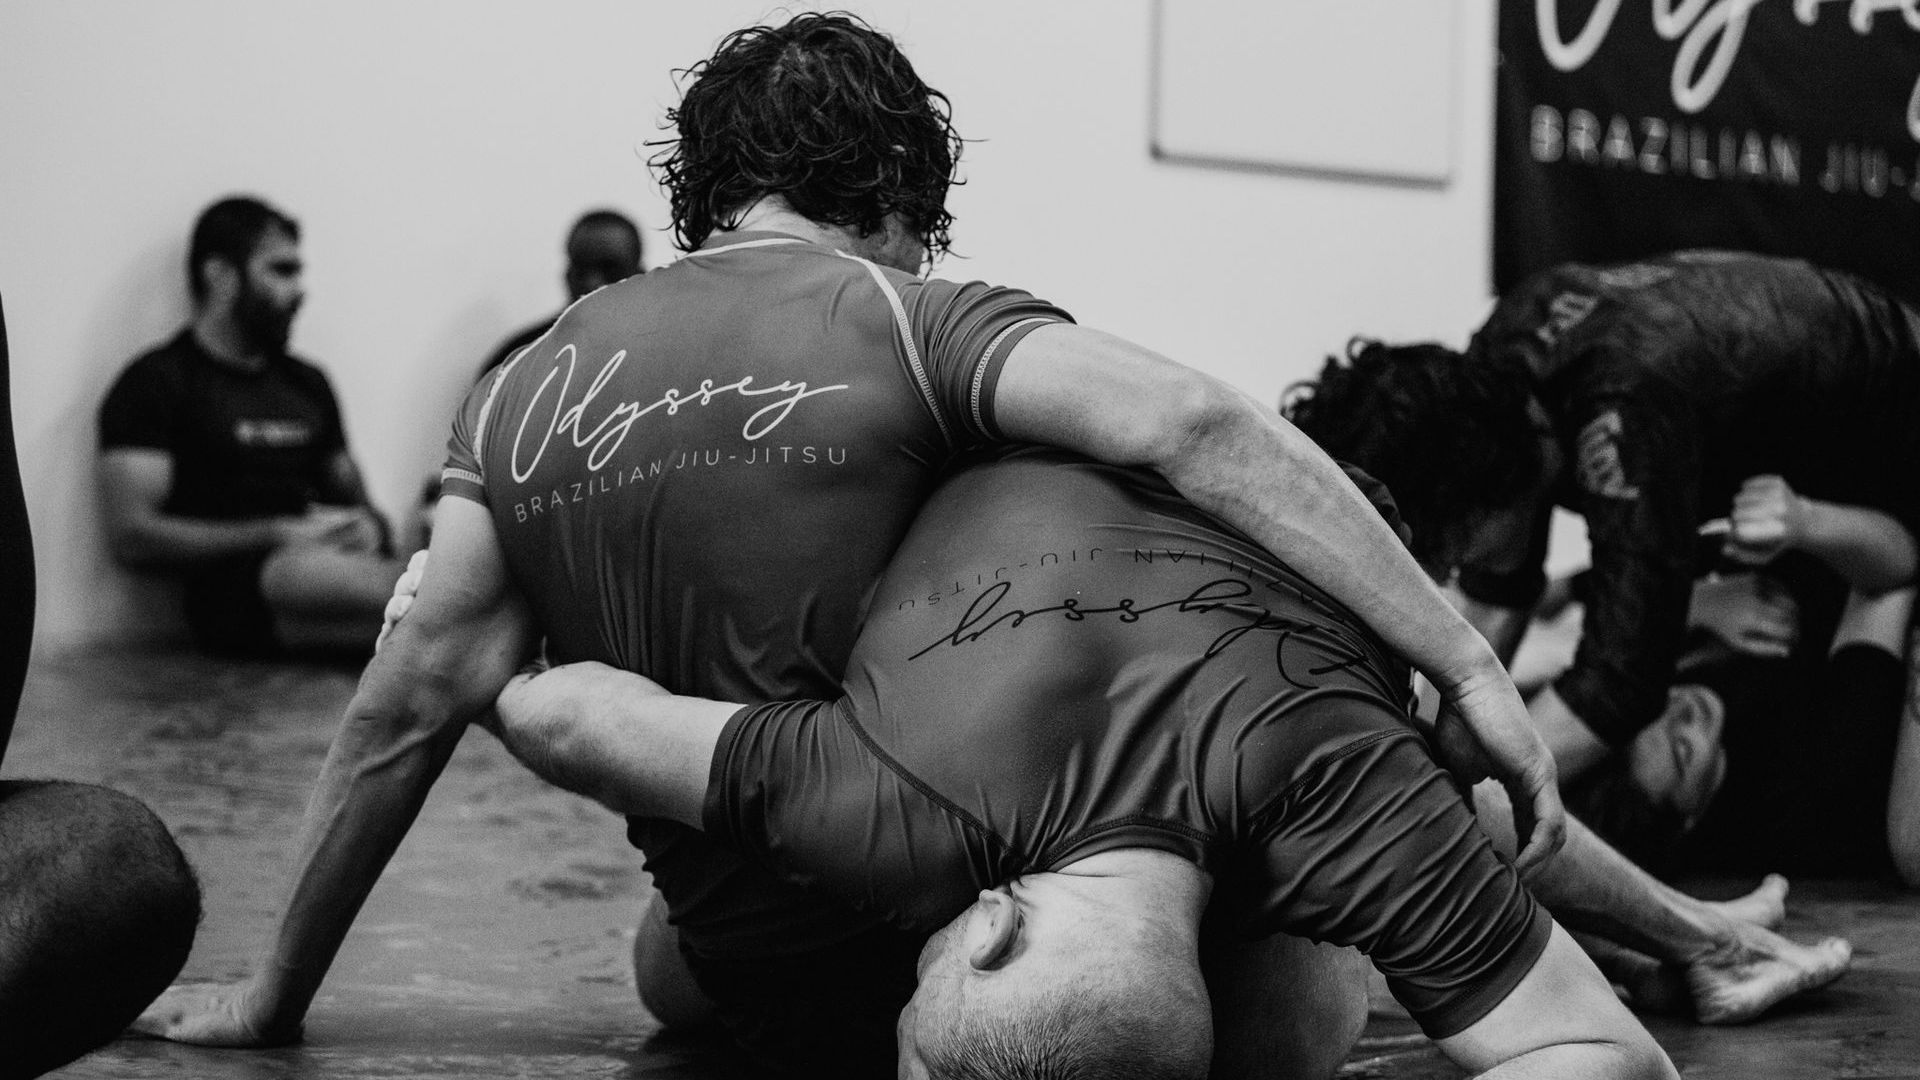 two men are wrestling on a mat in a gym .